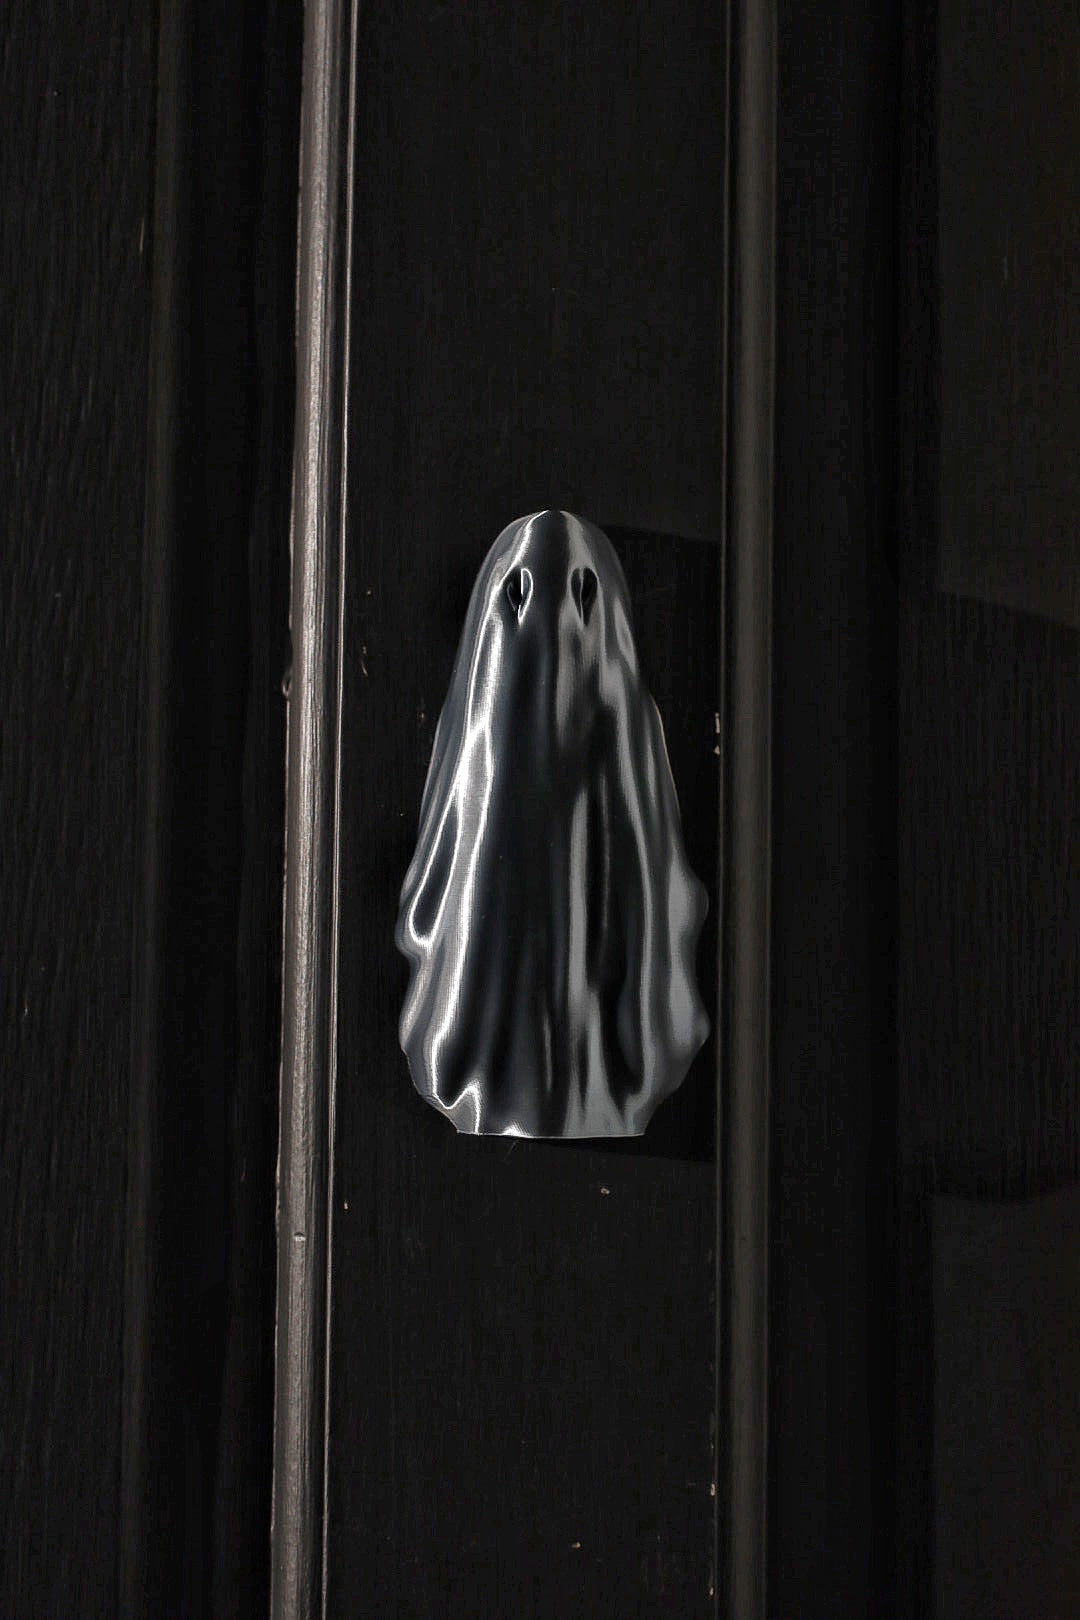 Ghost Wall Hanging